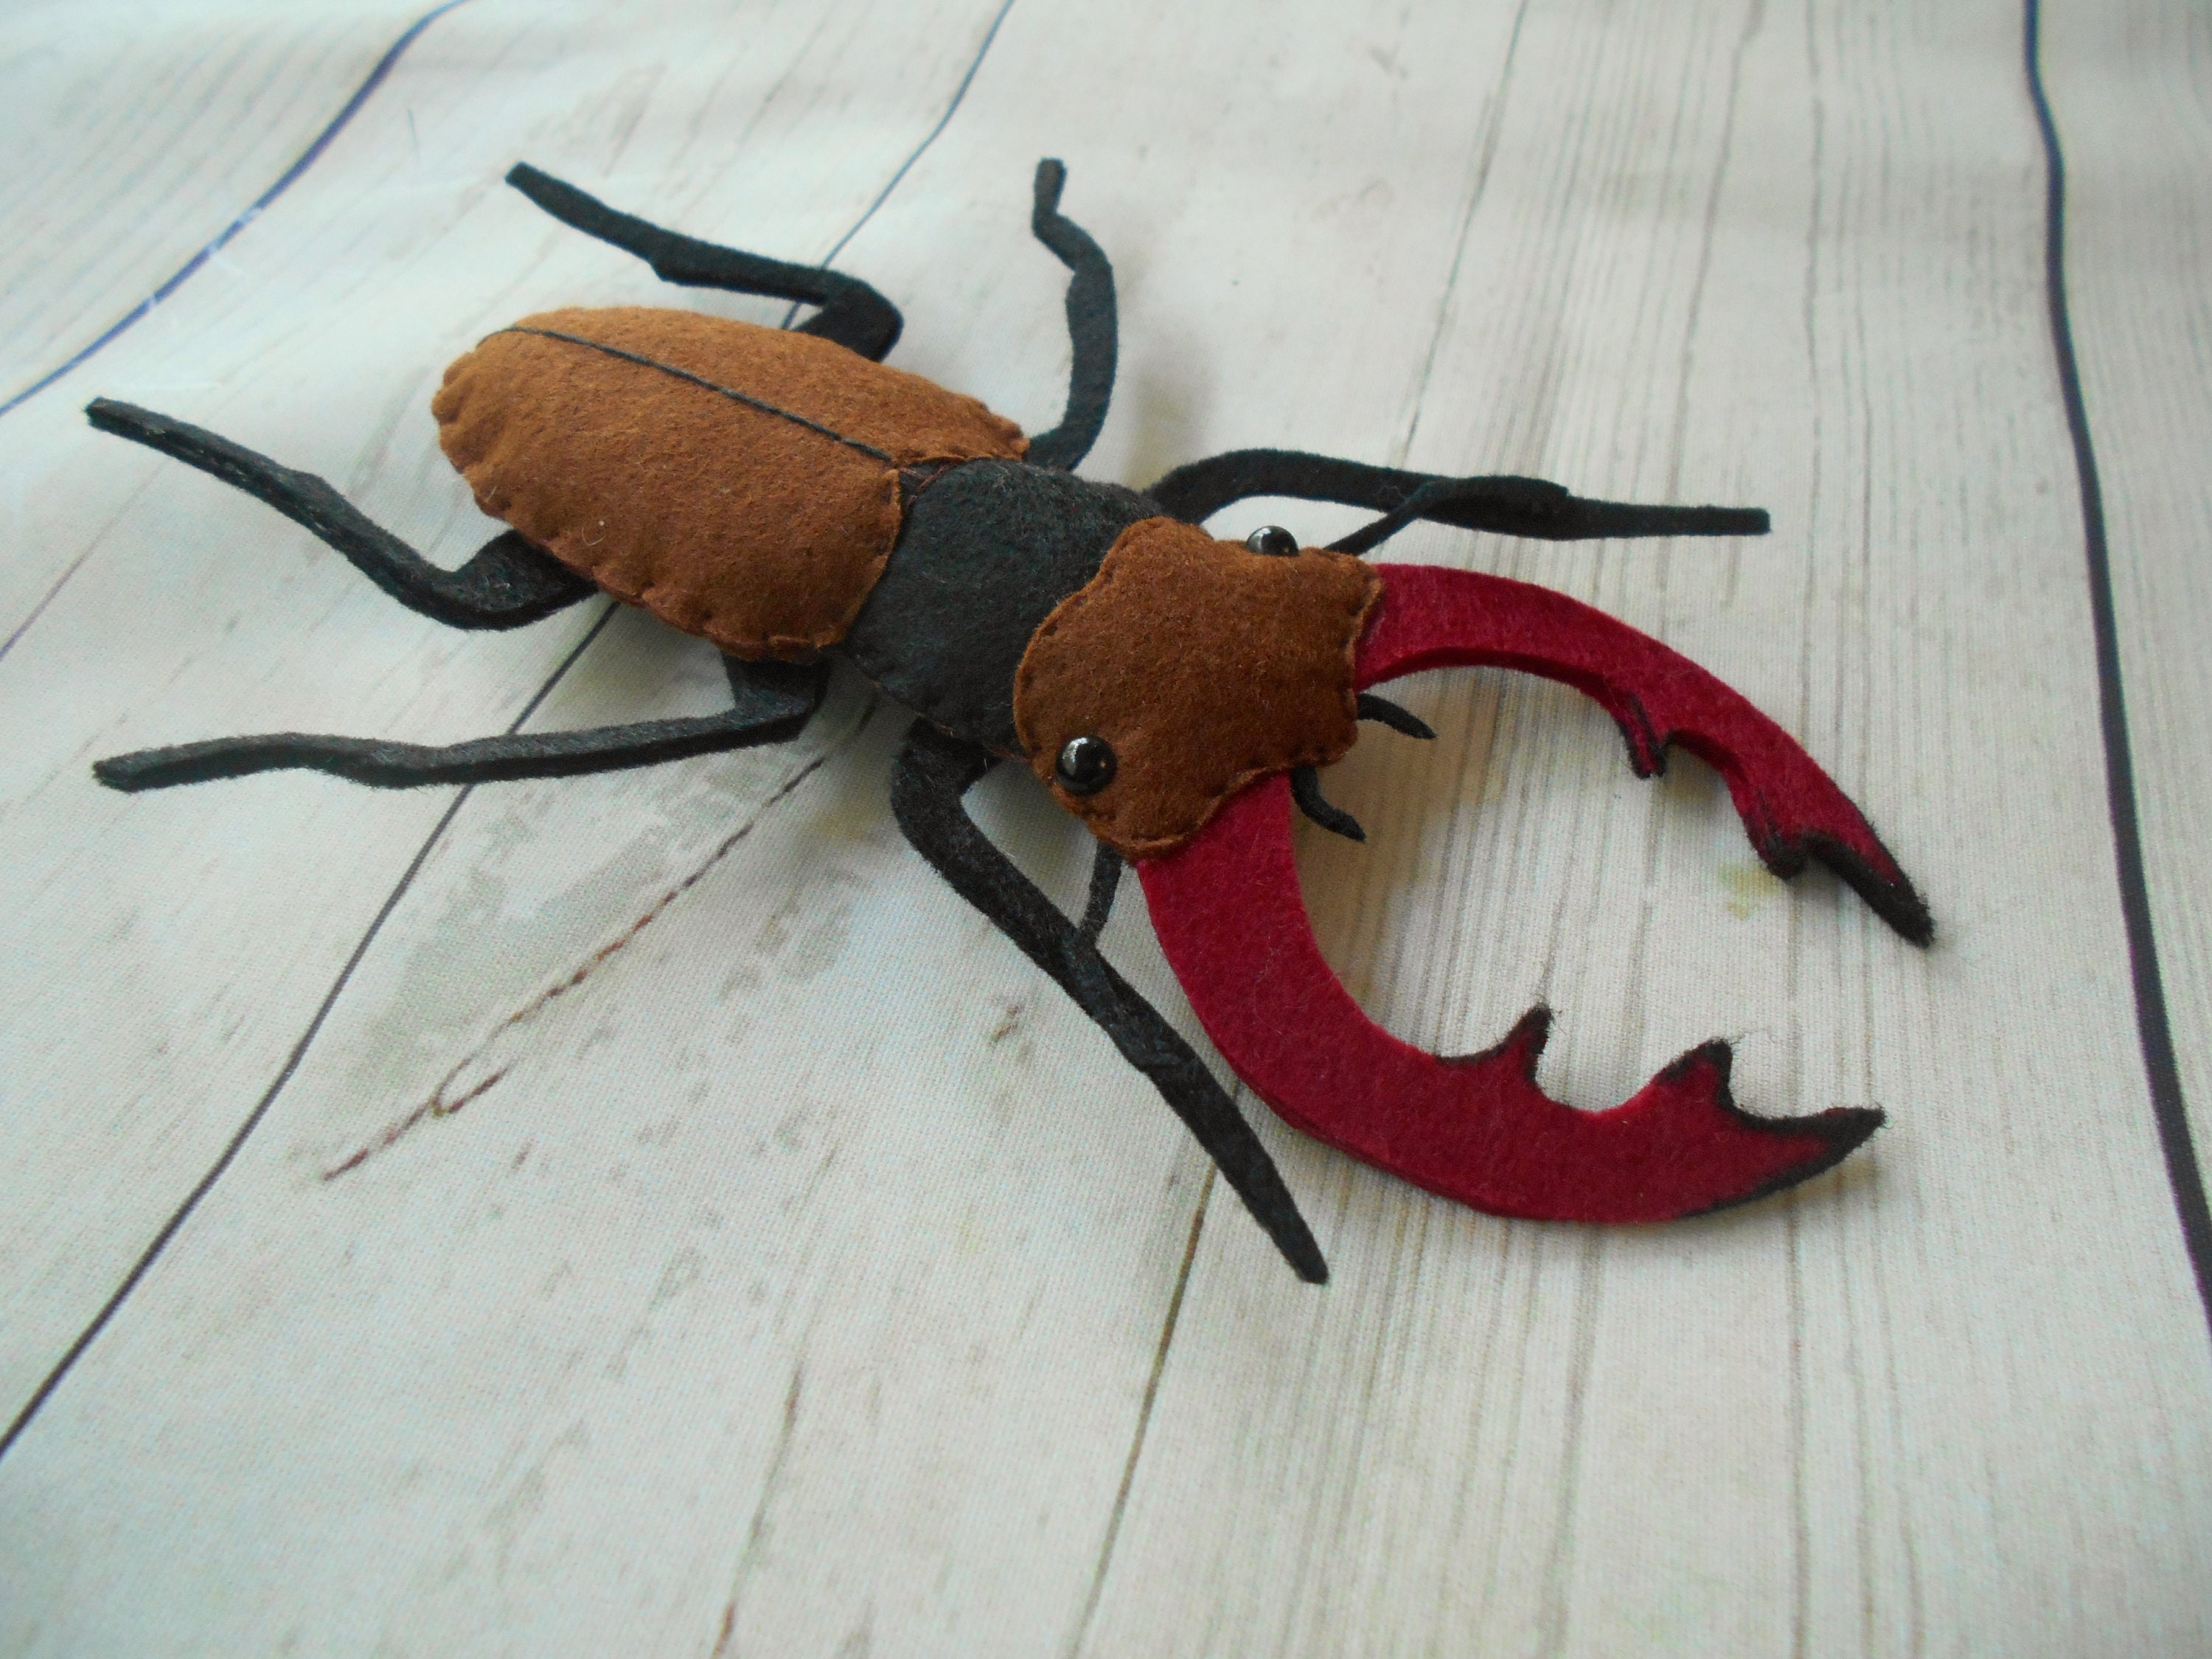 Realistic Stag Beetle Toy Felted Stag Beetle Figurine Learn pic pic